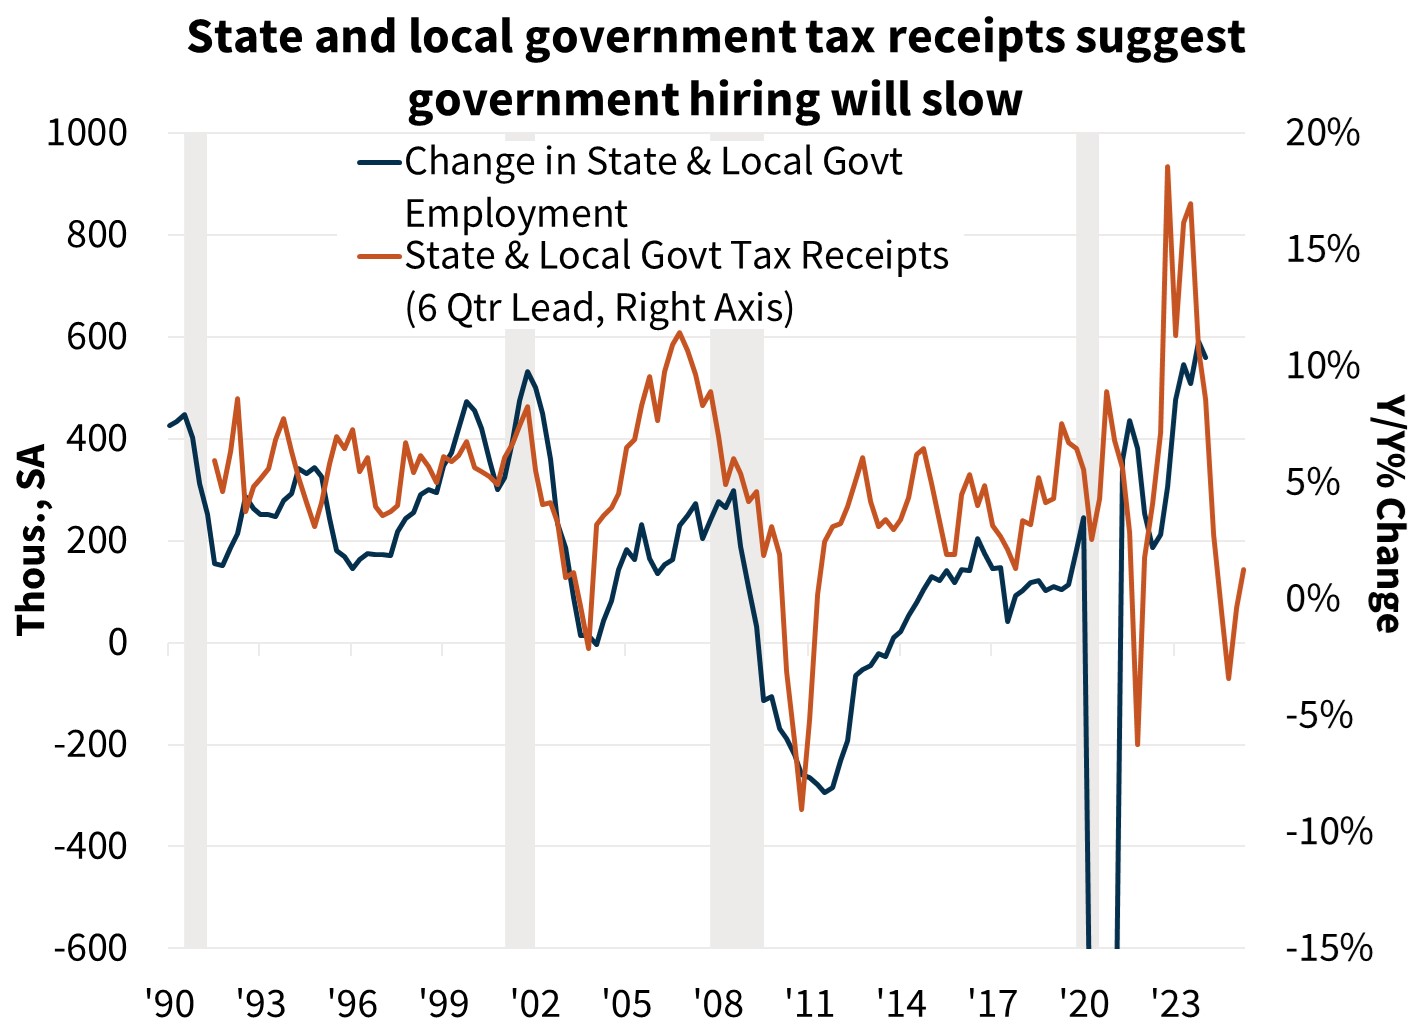 State and local government tax receipts suggest government hiring will slow